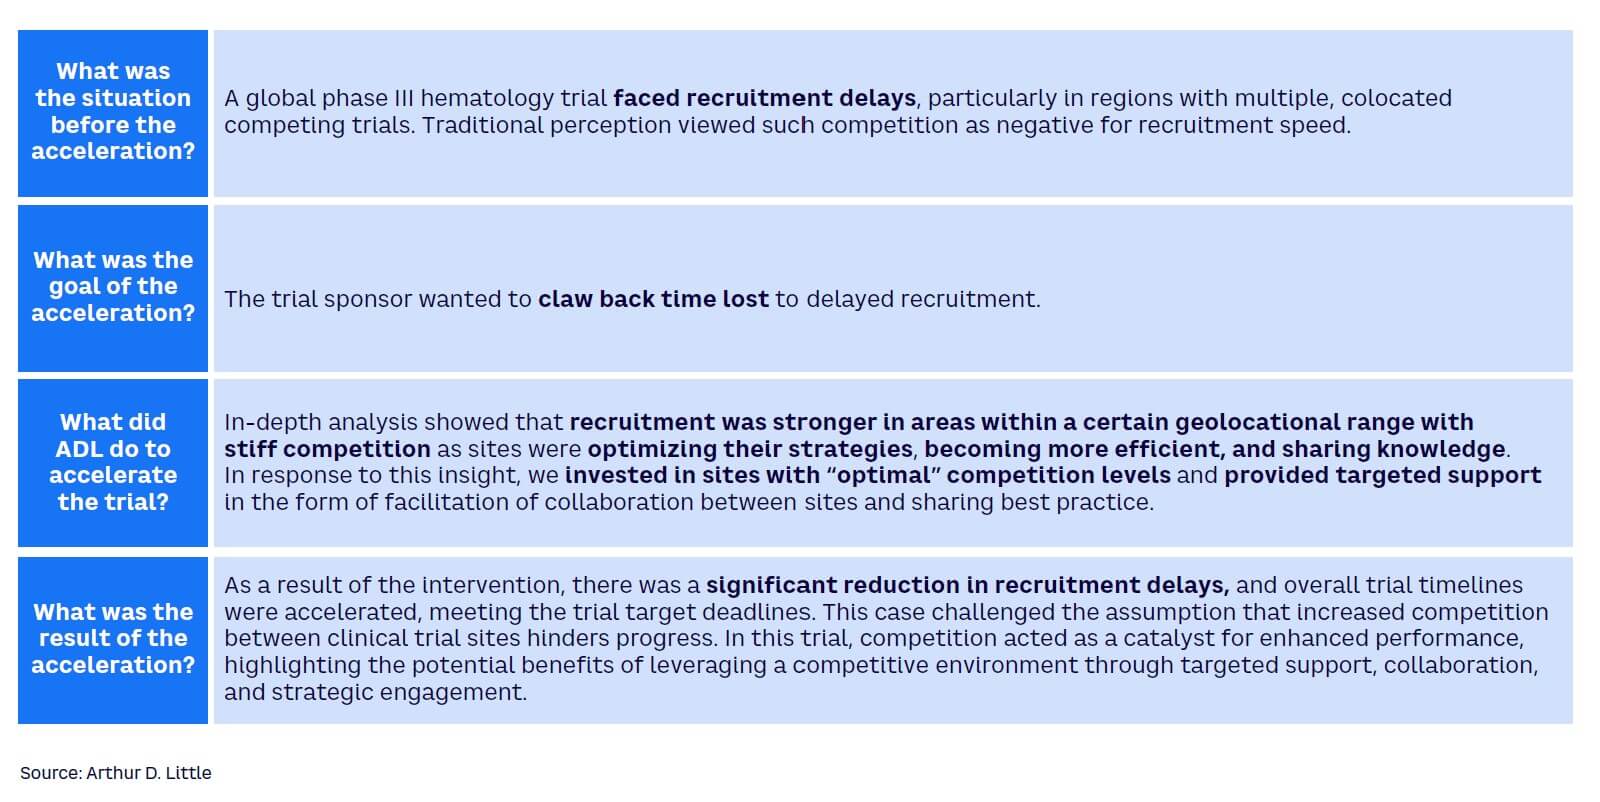 Figure 6. Harnessing the power of competition to drive increased recruitment — case study 2